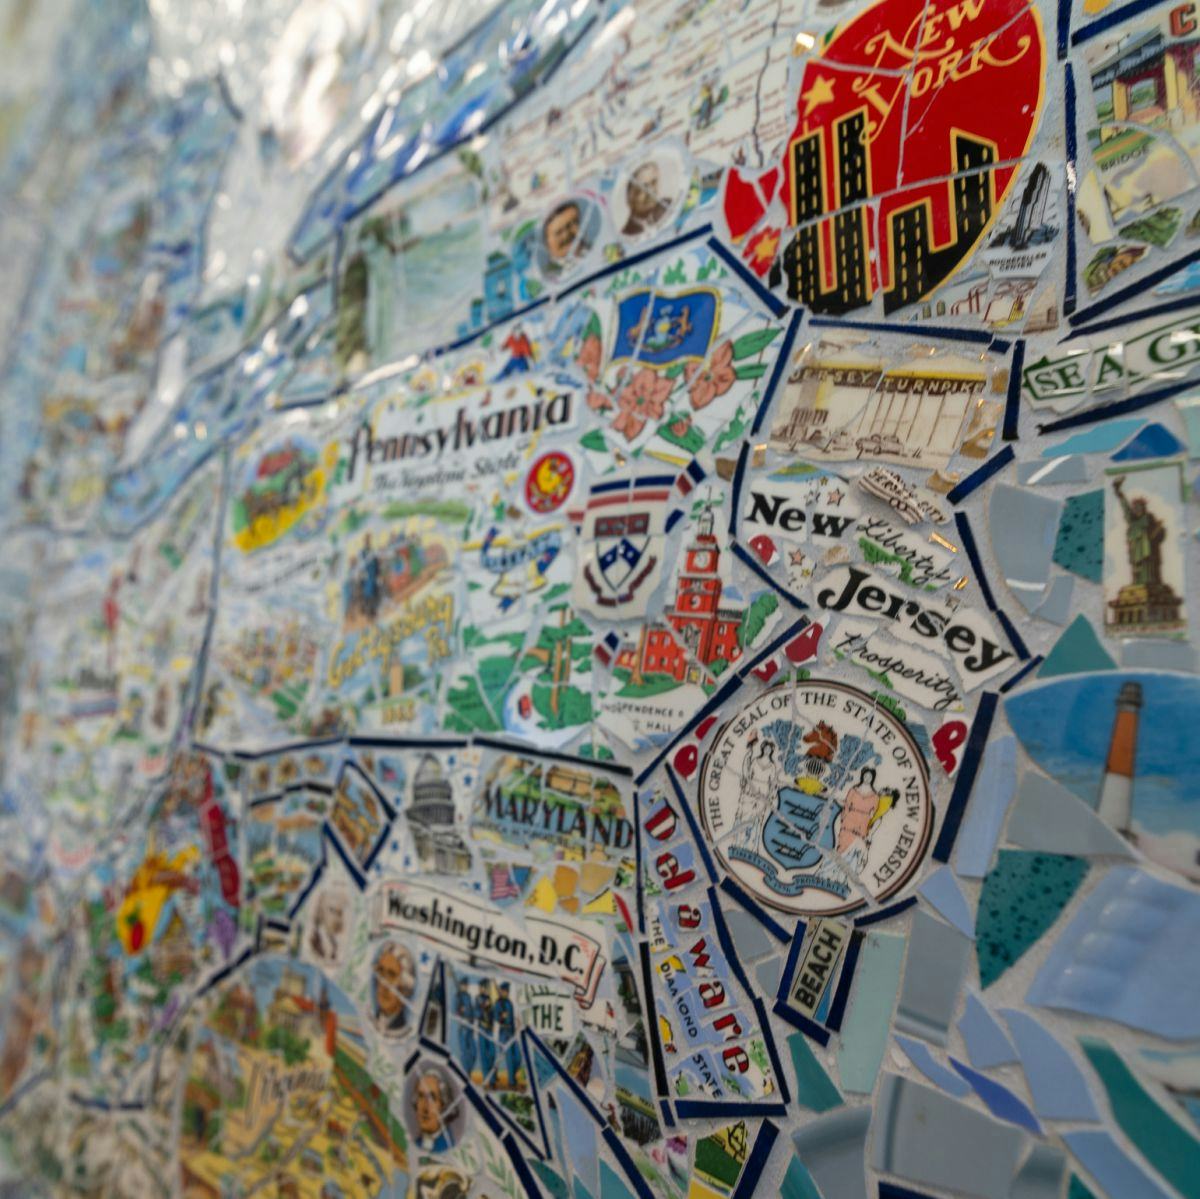 Mosaic of broken plates formed into an american map with a focus on New Jersey.